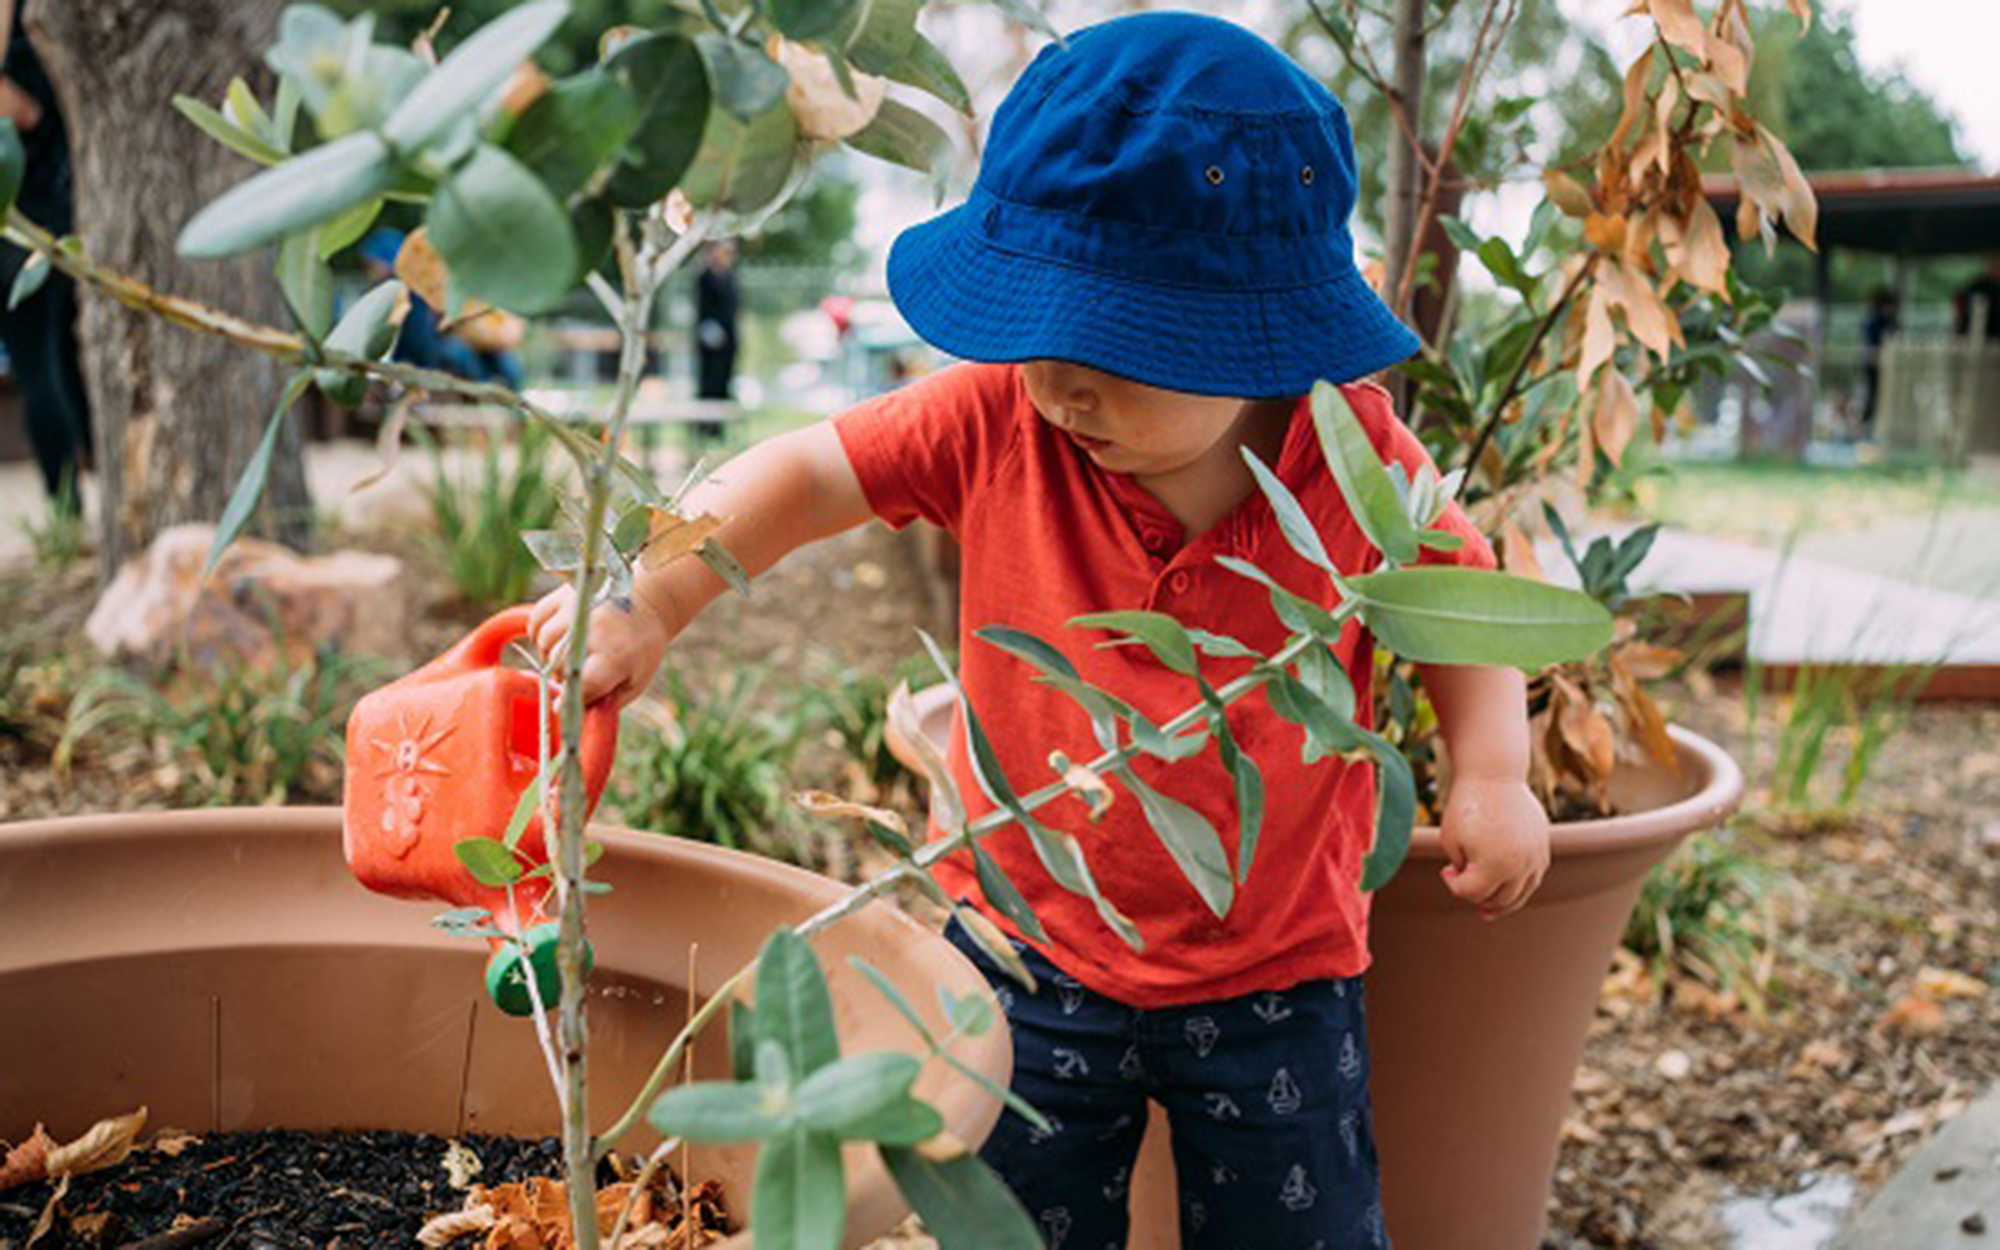 A small boy watering a plant with a small plastic watering can 